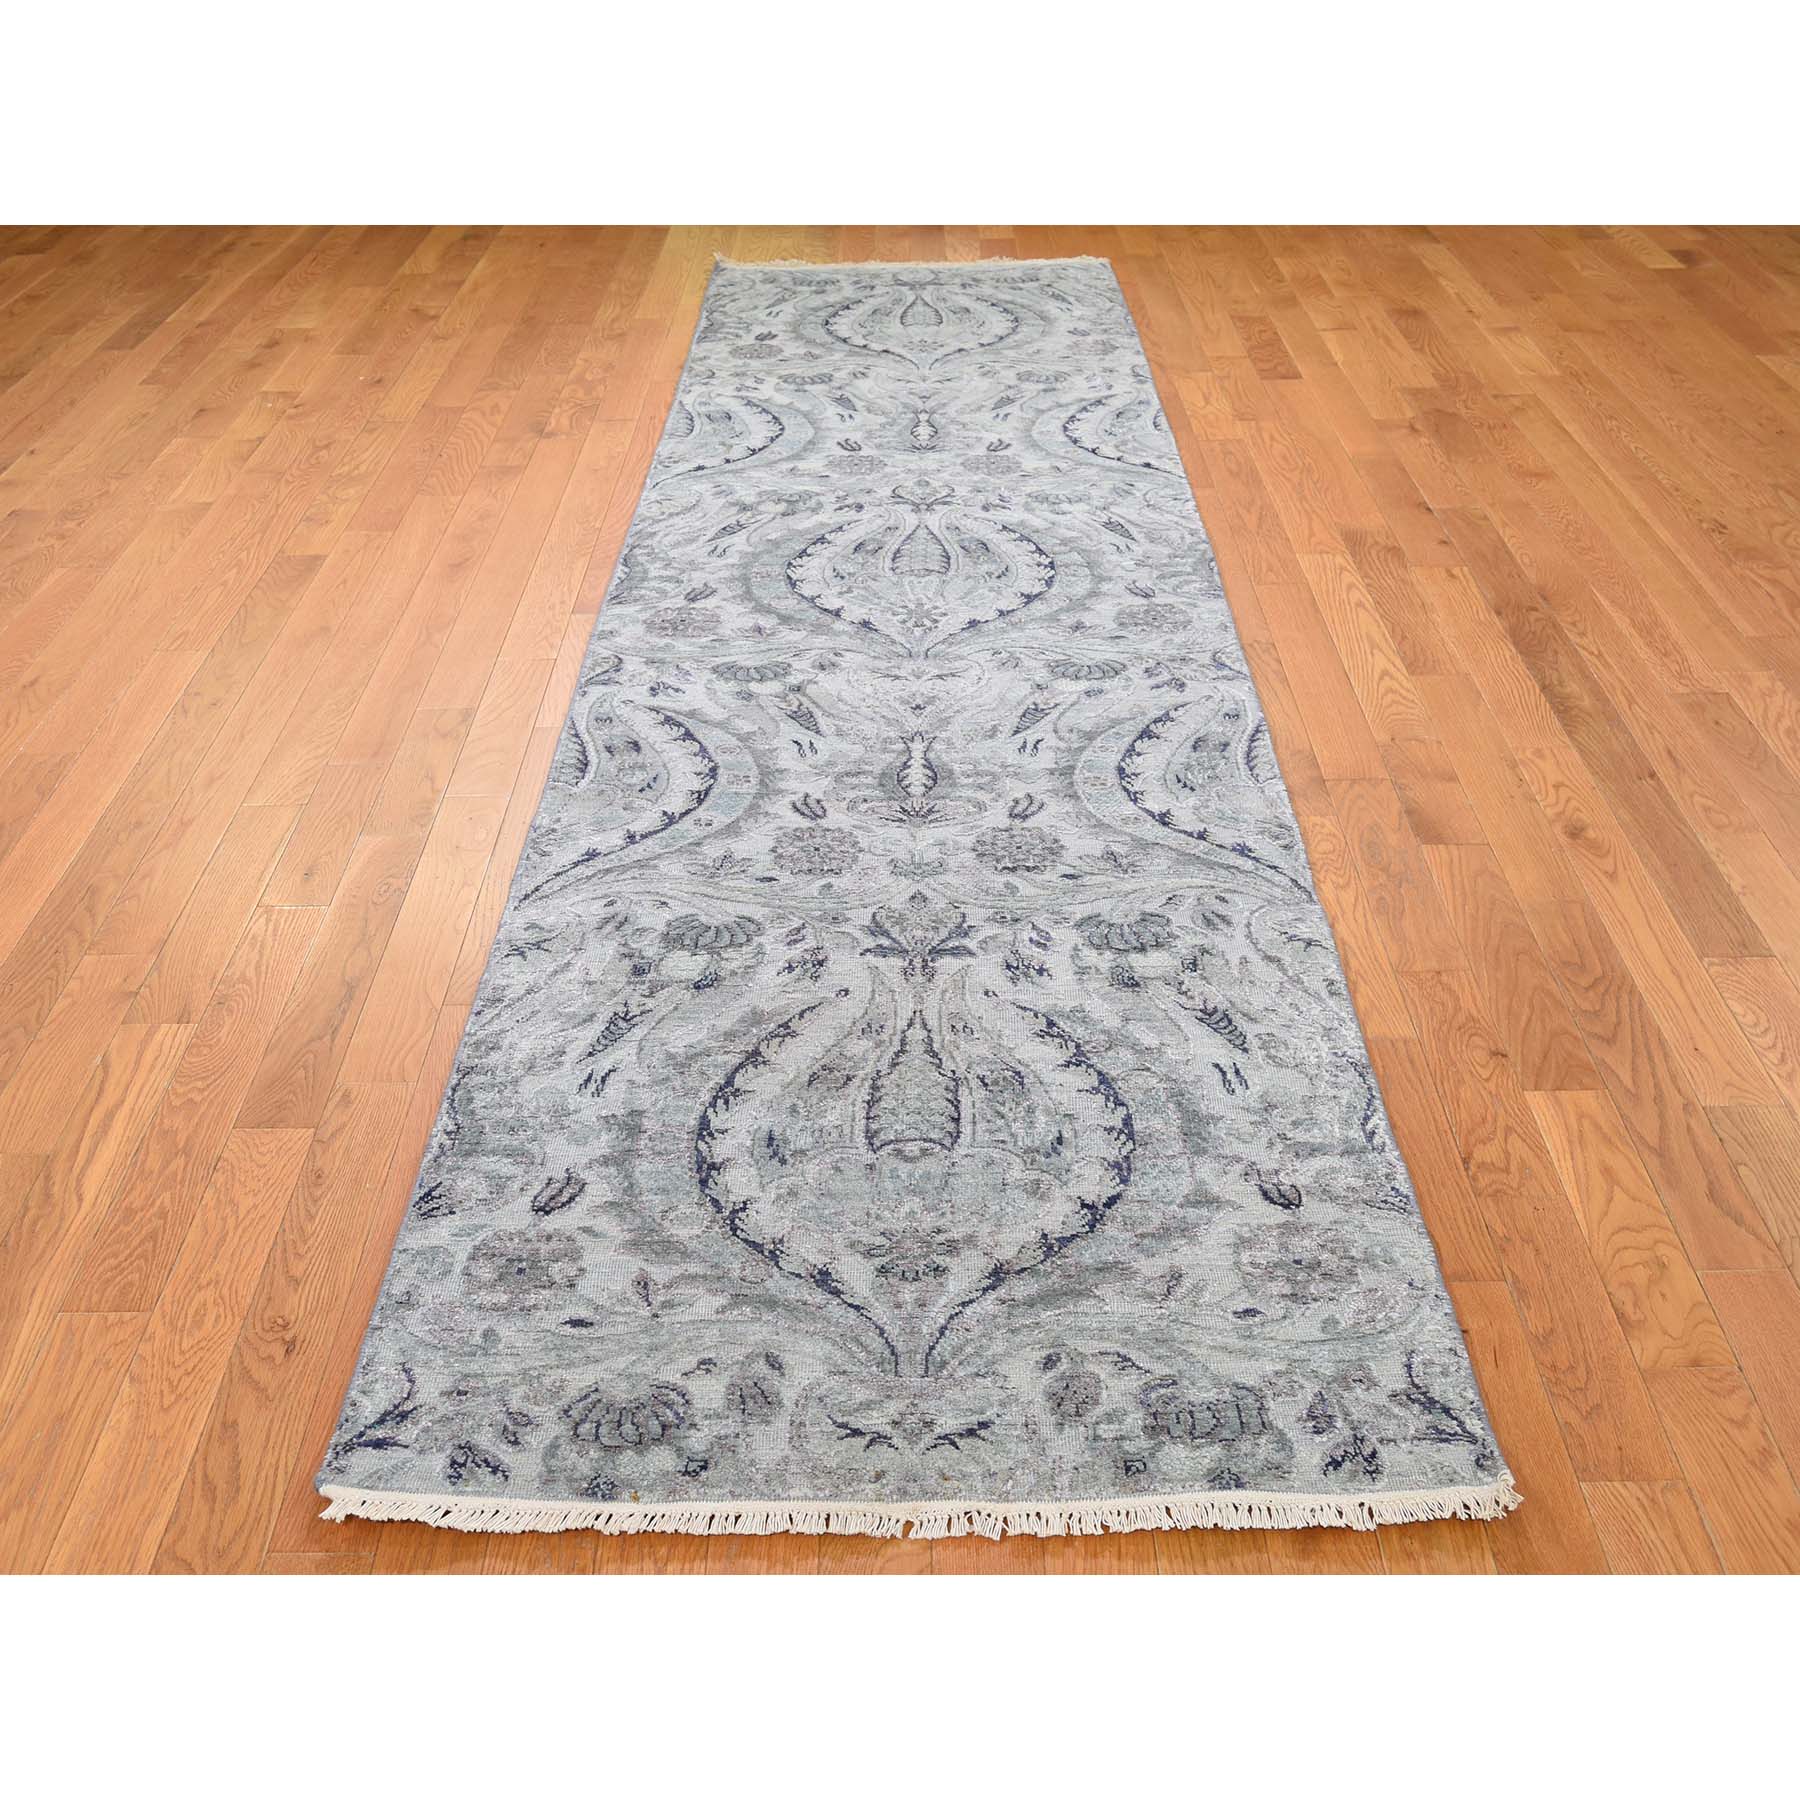 3'x11'10" Pure Silk With Textured Wool Lotus Flower Design Hand Woven Rug 